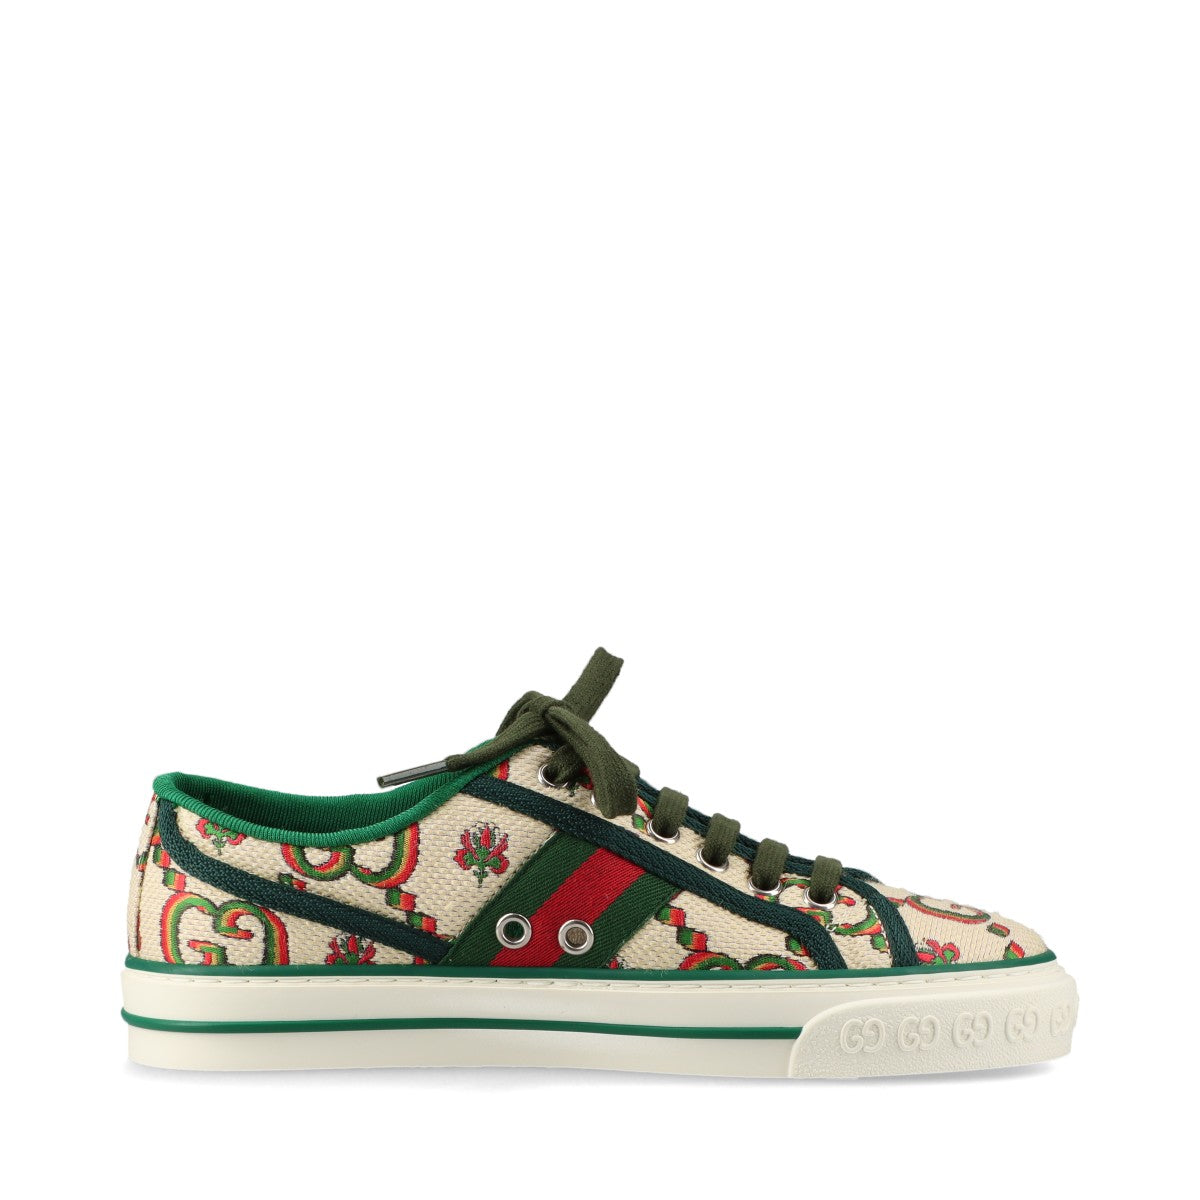 Gucci Tennis 1977 canvas Sneakers 35.5 Ladies' Multicolor GG Supreme Flower 100th anniversary Replaceable cord Box There is a storage bag